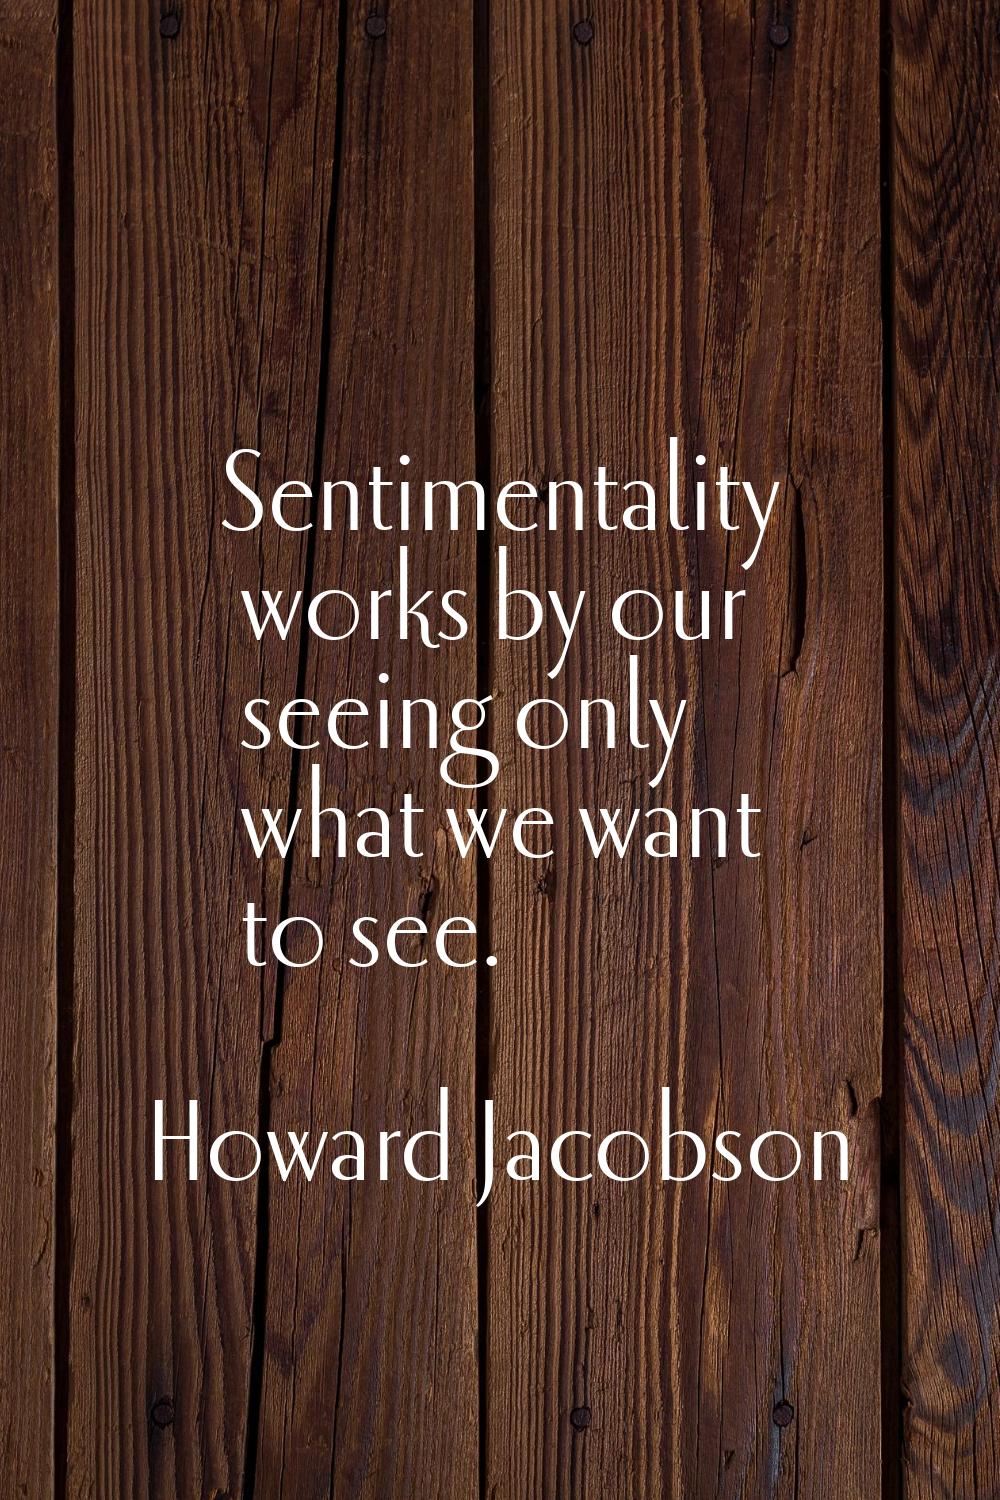 Sentimentality works by our seeing only what we want to see.